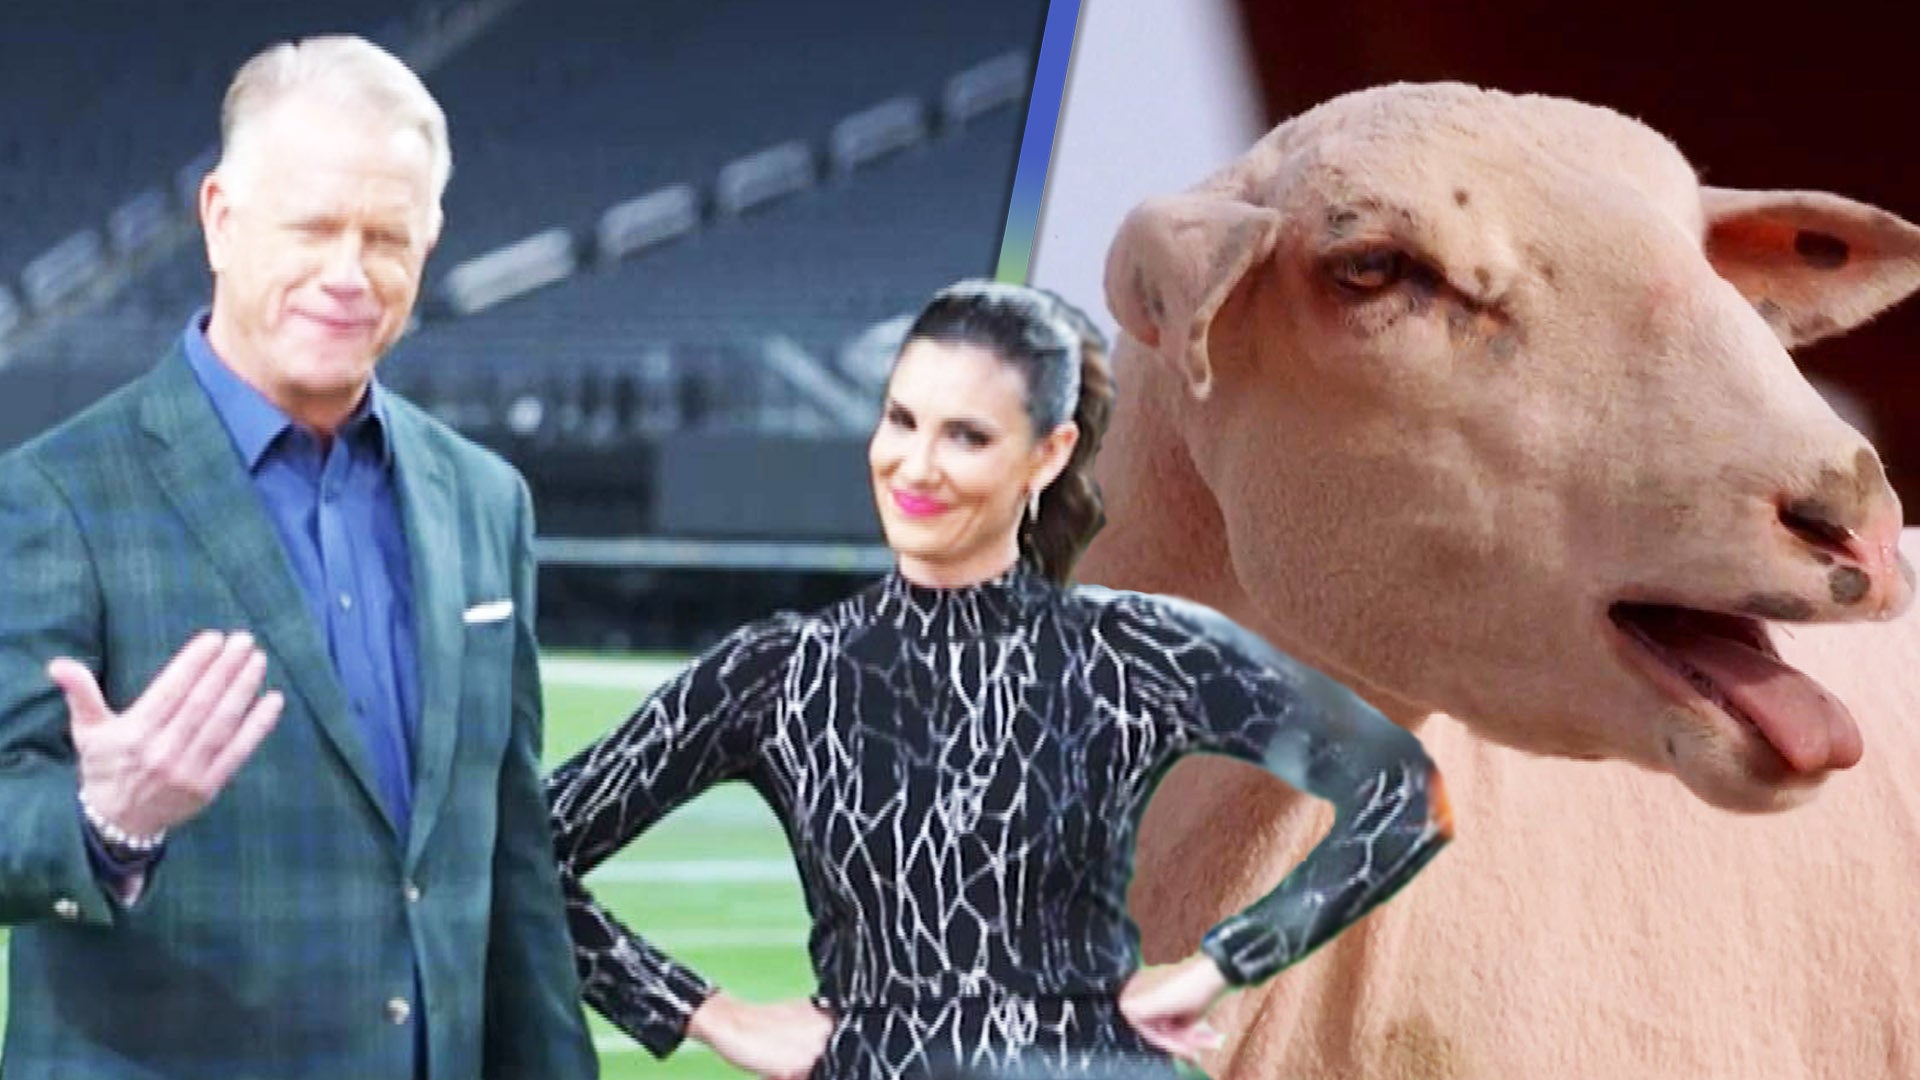 Inside 'Super Bowl Greatest Commercials' With Boomer Esaison and Daniela Ruah (Exclusive)